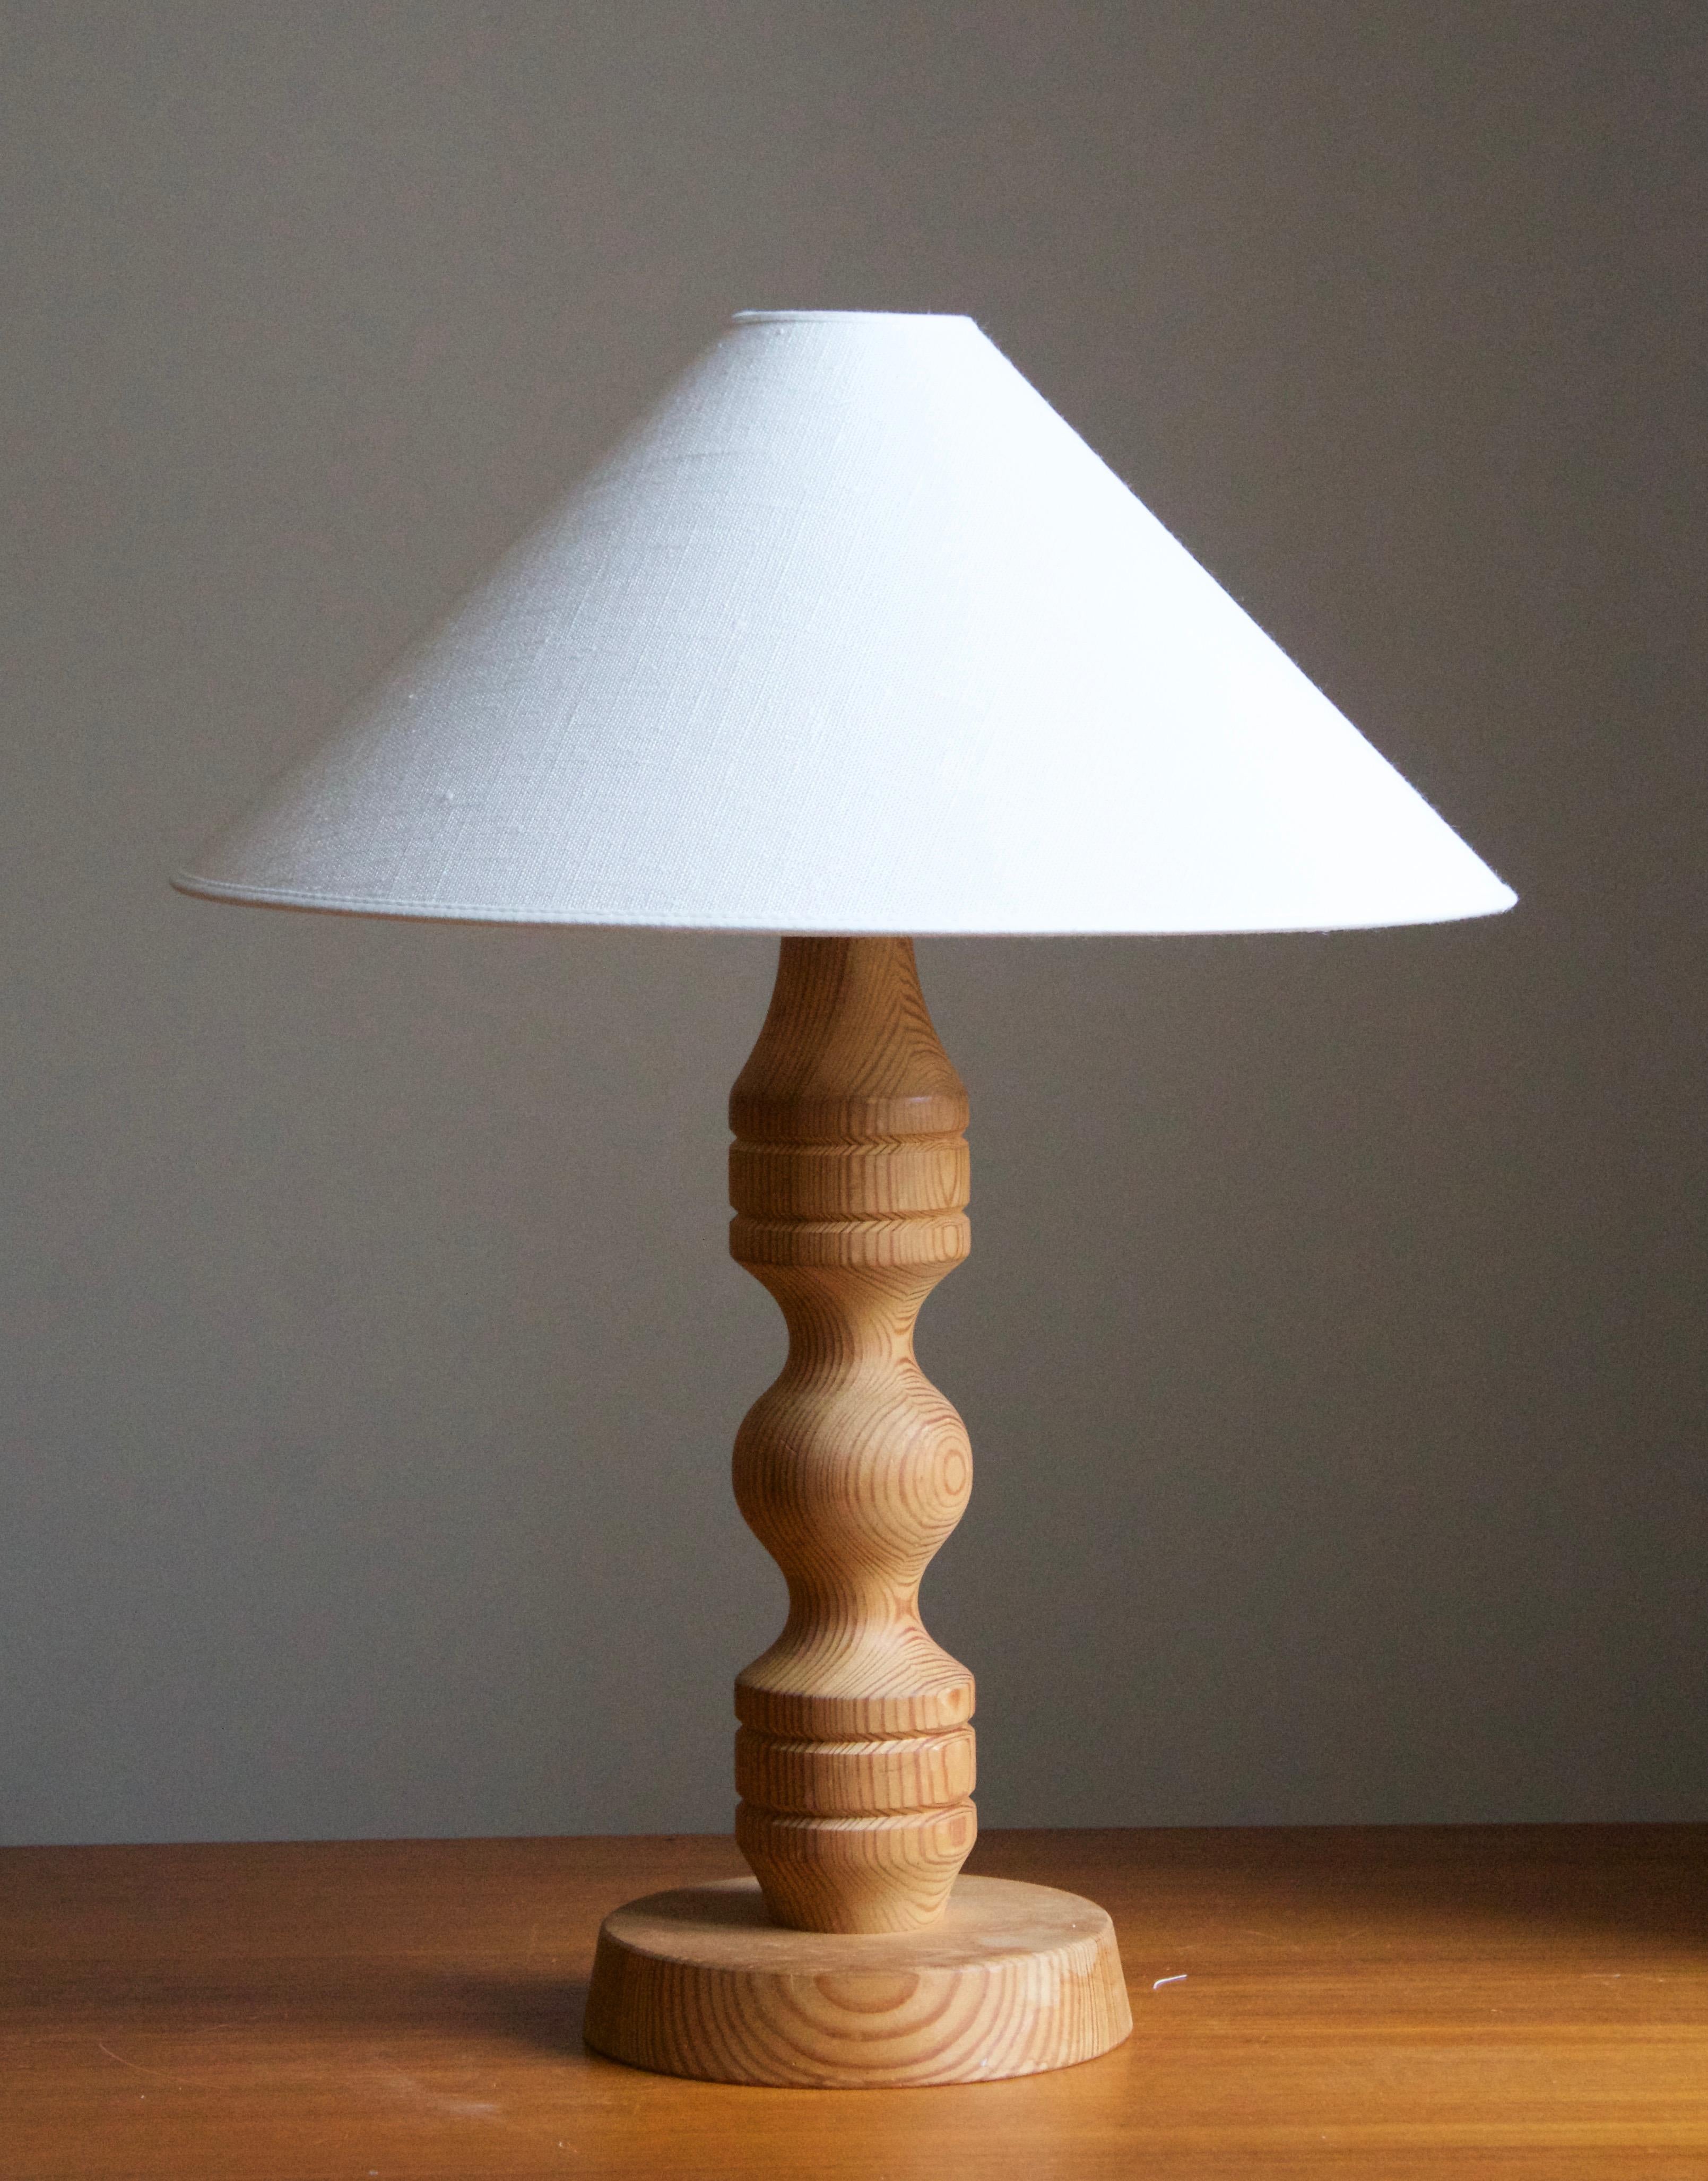 A table lamp, in pine. Produced in Sweden c. 1970s.

Sold without lampshade, stated dimensions exclude lampshade, height includes socket.